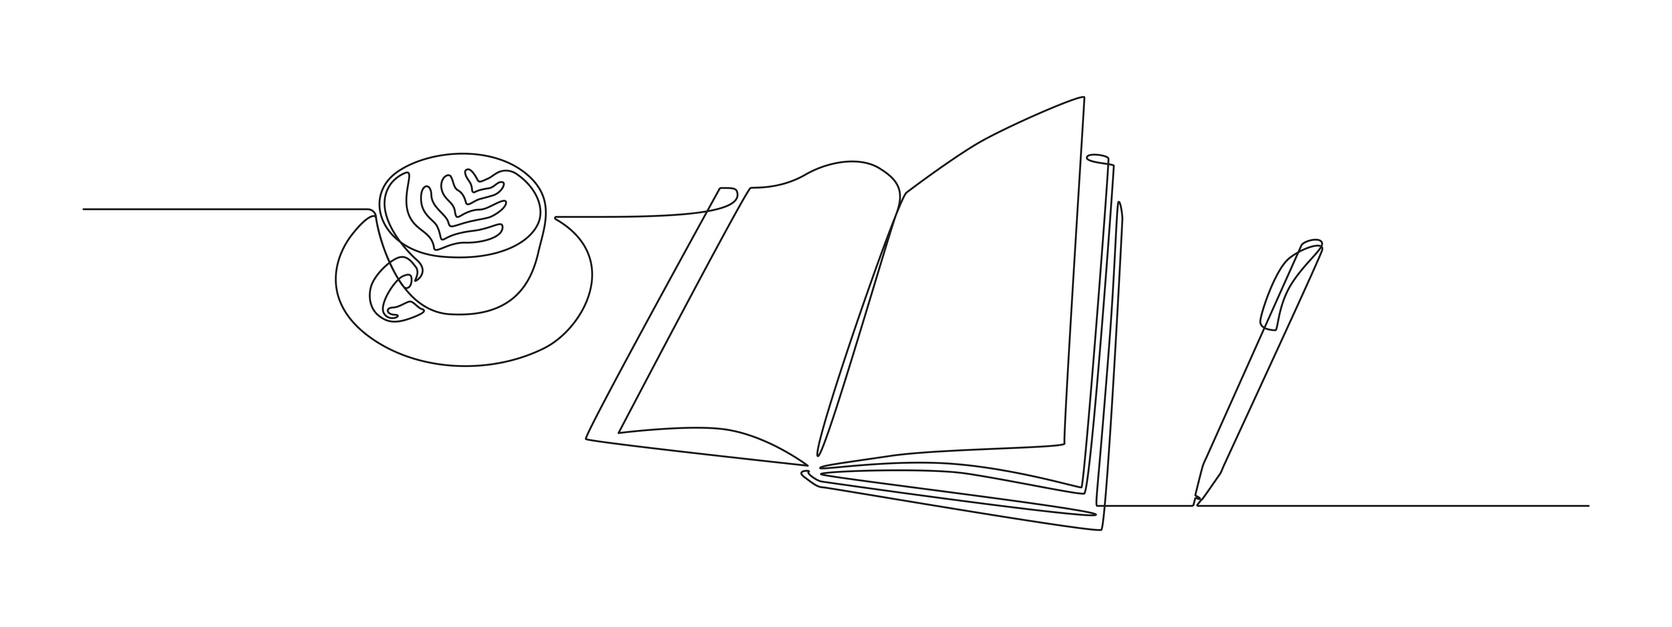 Opened book with cup of coffee and pen in one continuous line drawing. Writes in diary and knowledge library concept in simple linear style. Editable stroke. Doodle vector illustration.